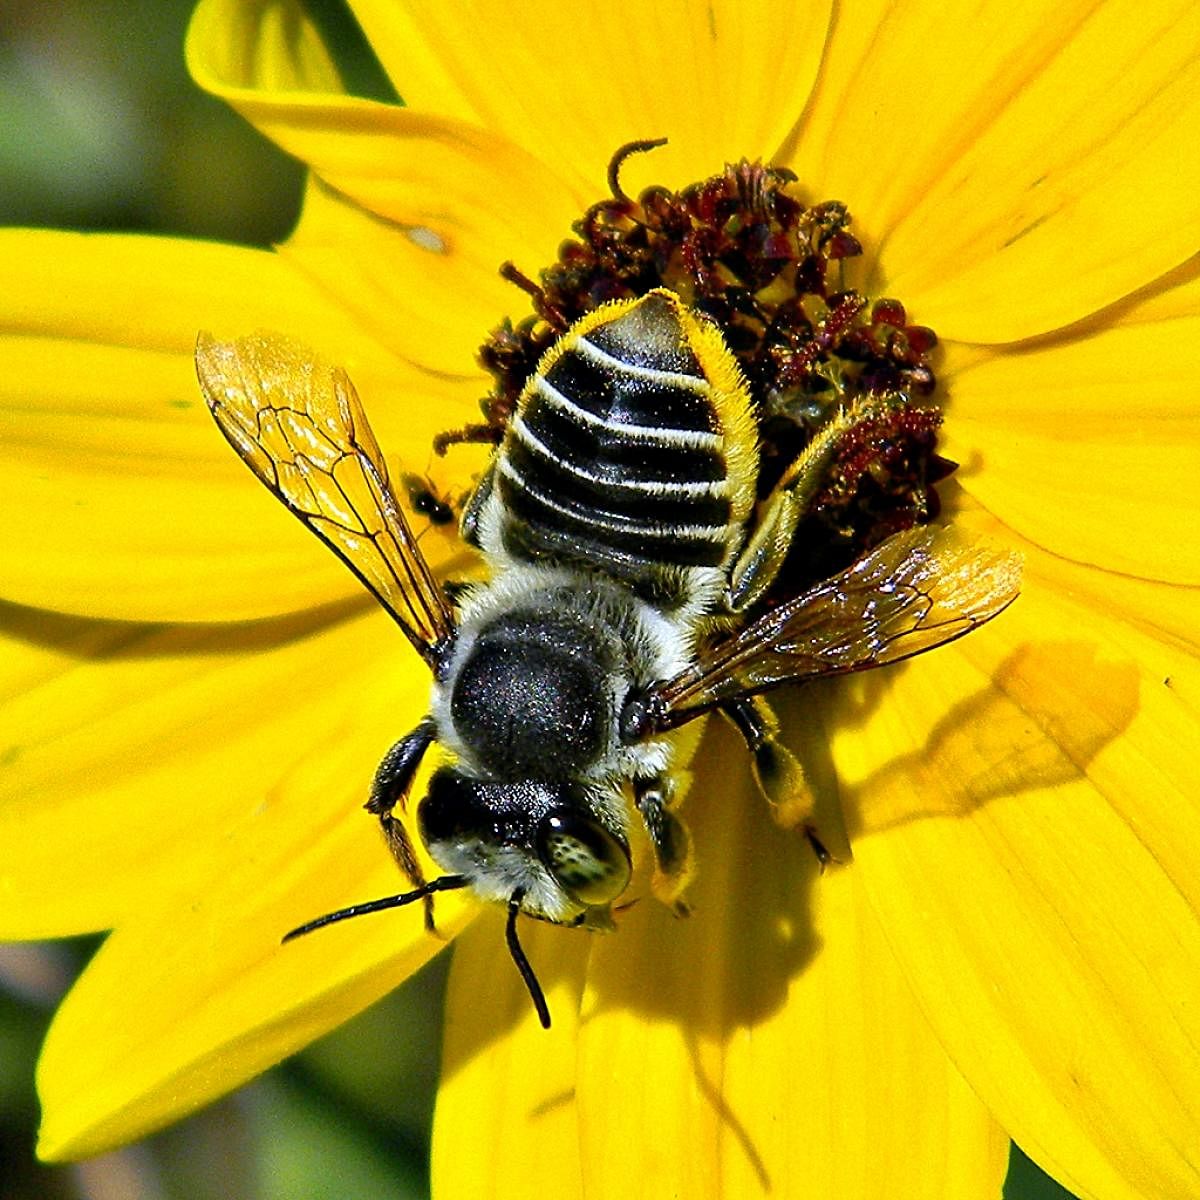 Unlike honey bees, leafcutter bees lead solitary lives.